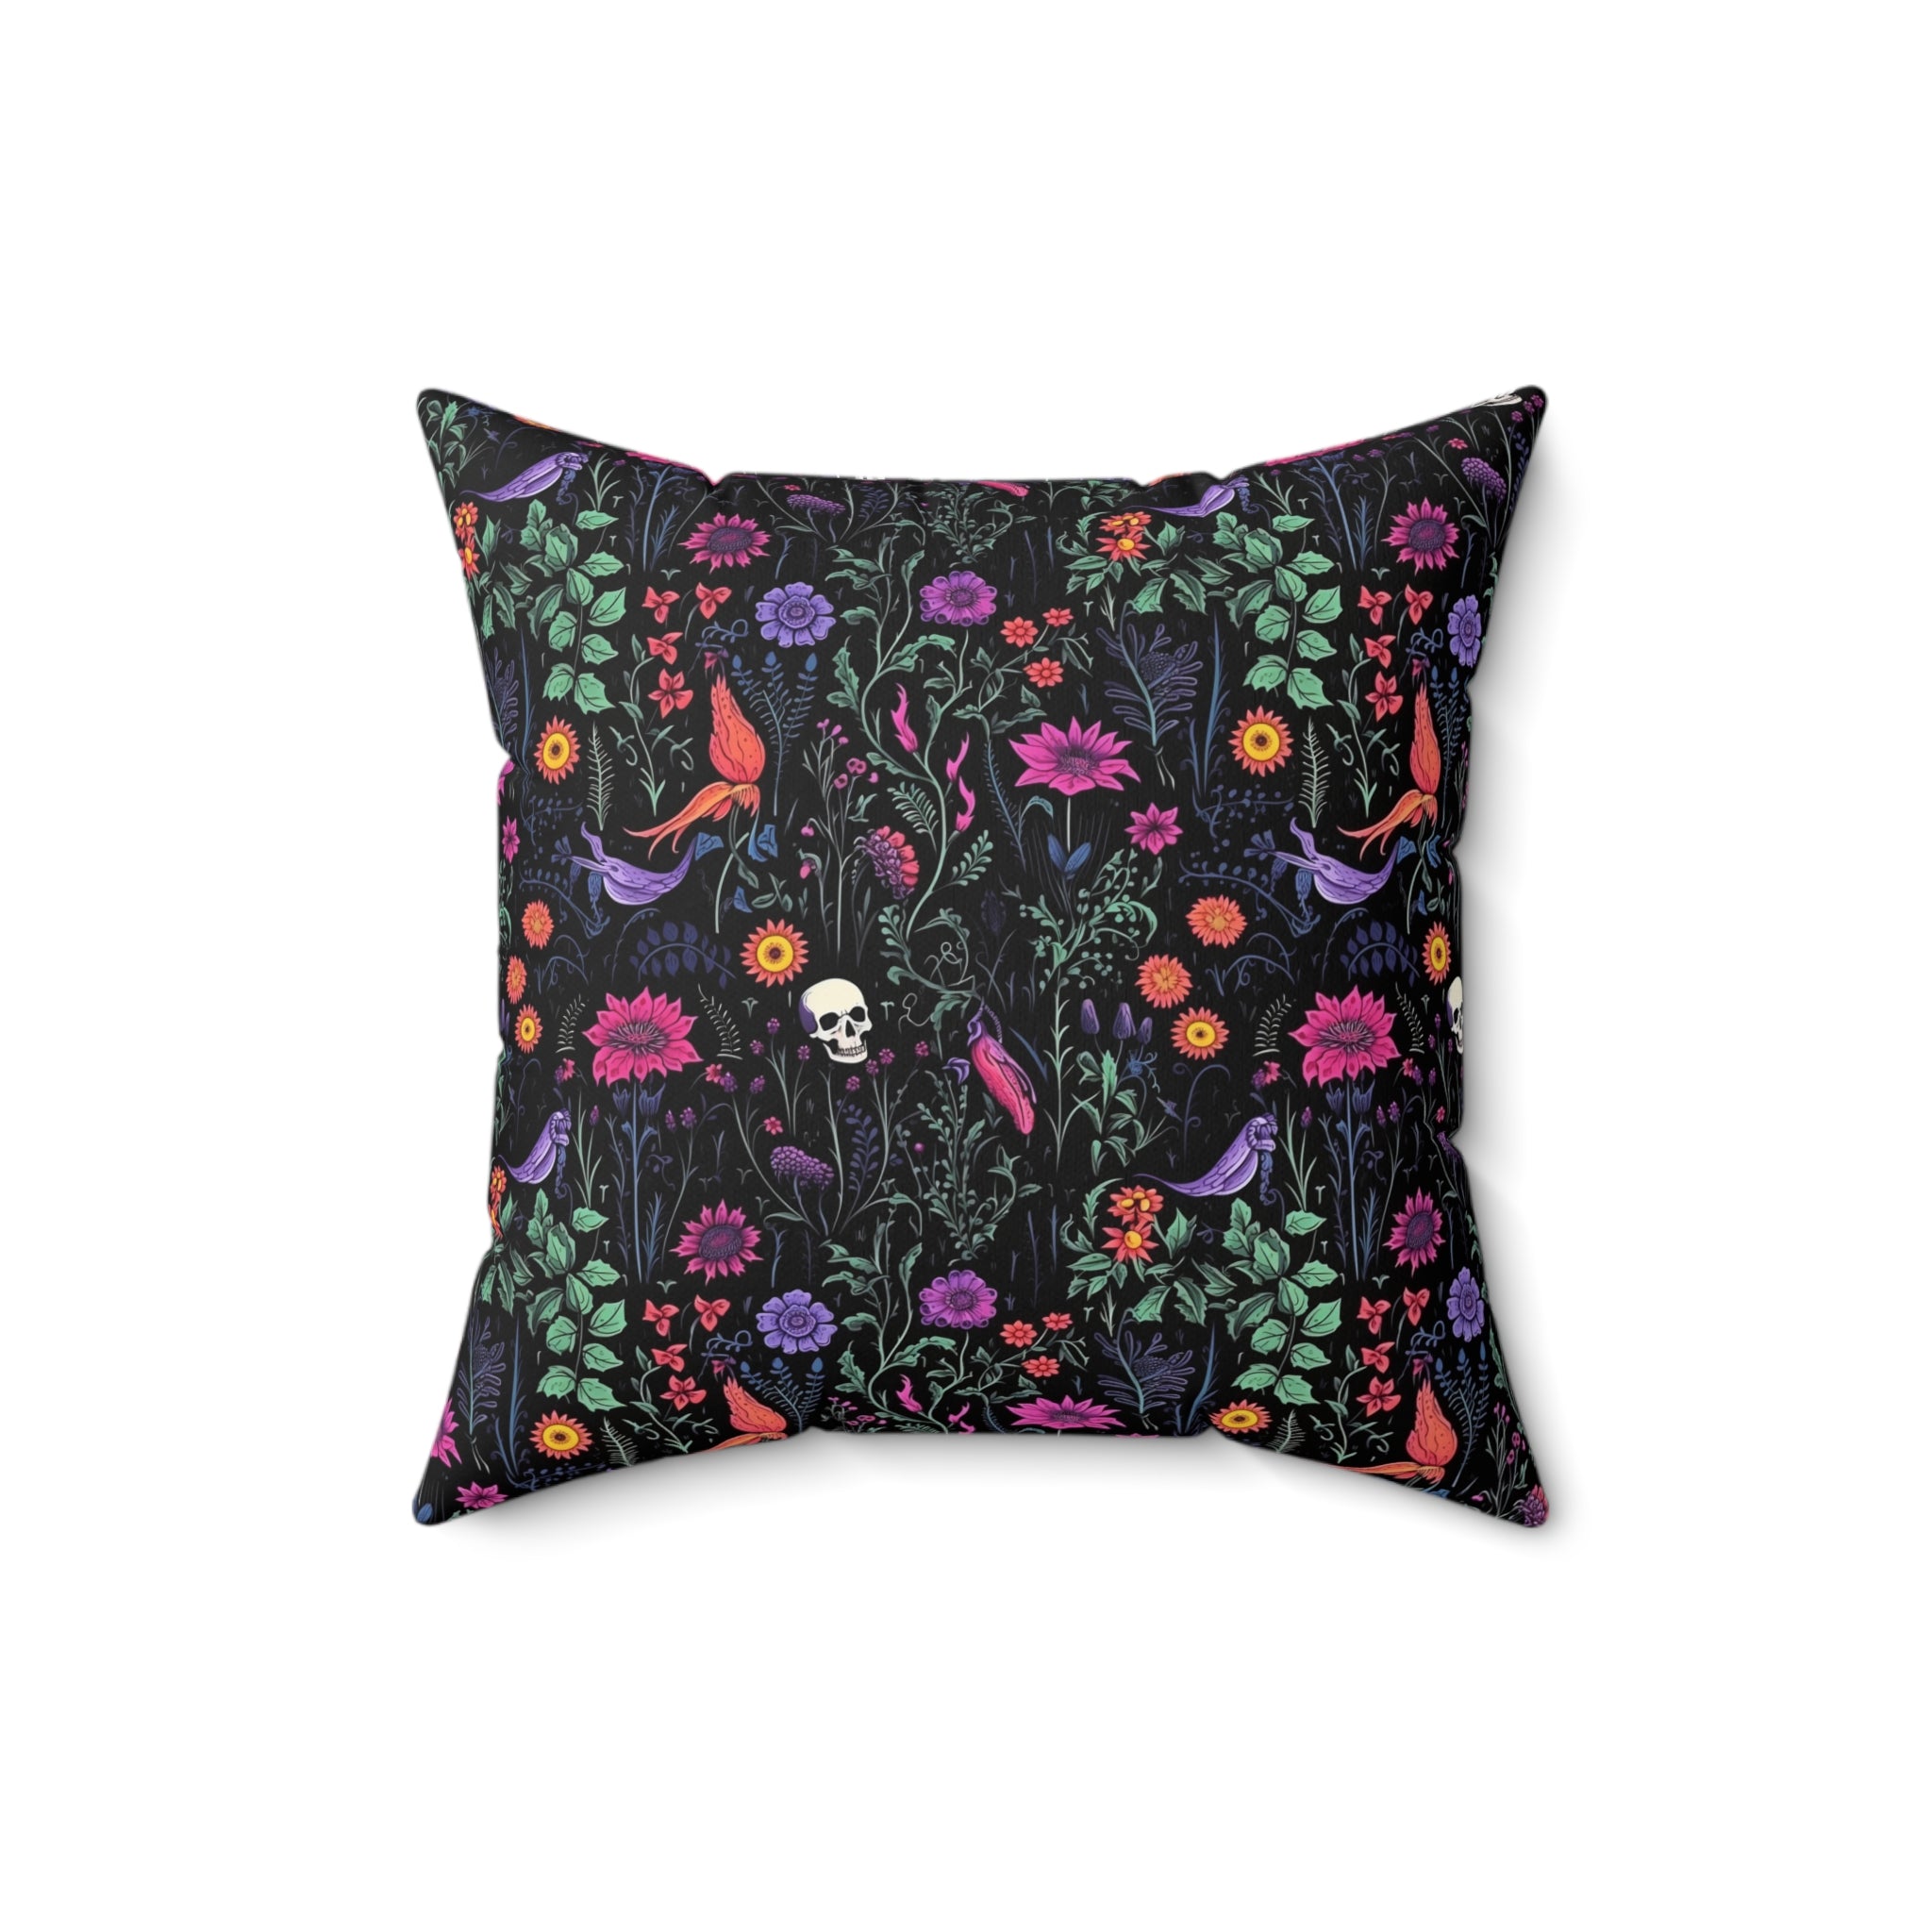 Eerie Wildflower Faux Suede Pillow Cover with Skull